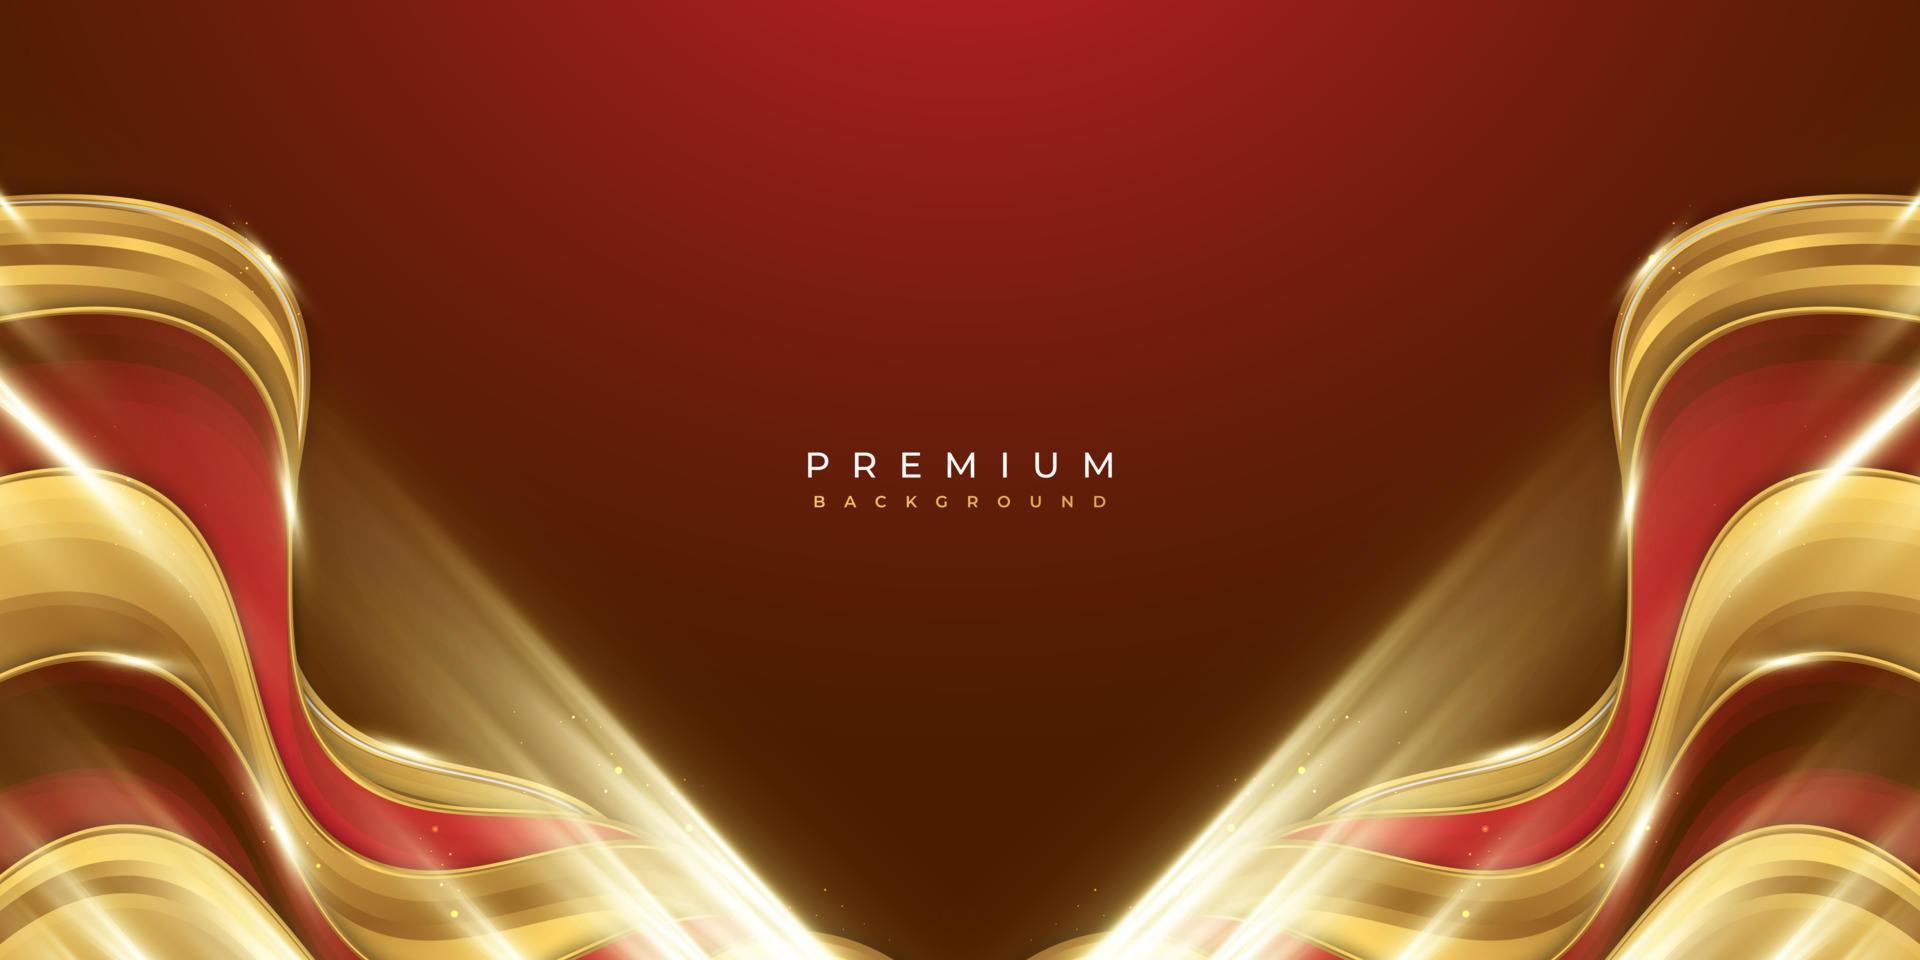 Luxury and Elegant Red and Gold Background with Golden Light and Paper Cut Style. Can be Used for Award, Banner, Card, Nomination, Ceremony, Formal Invitation or Certificate Design vector